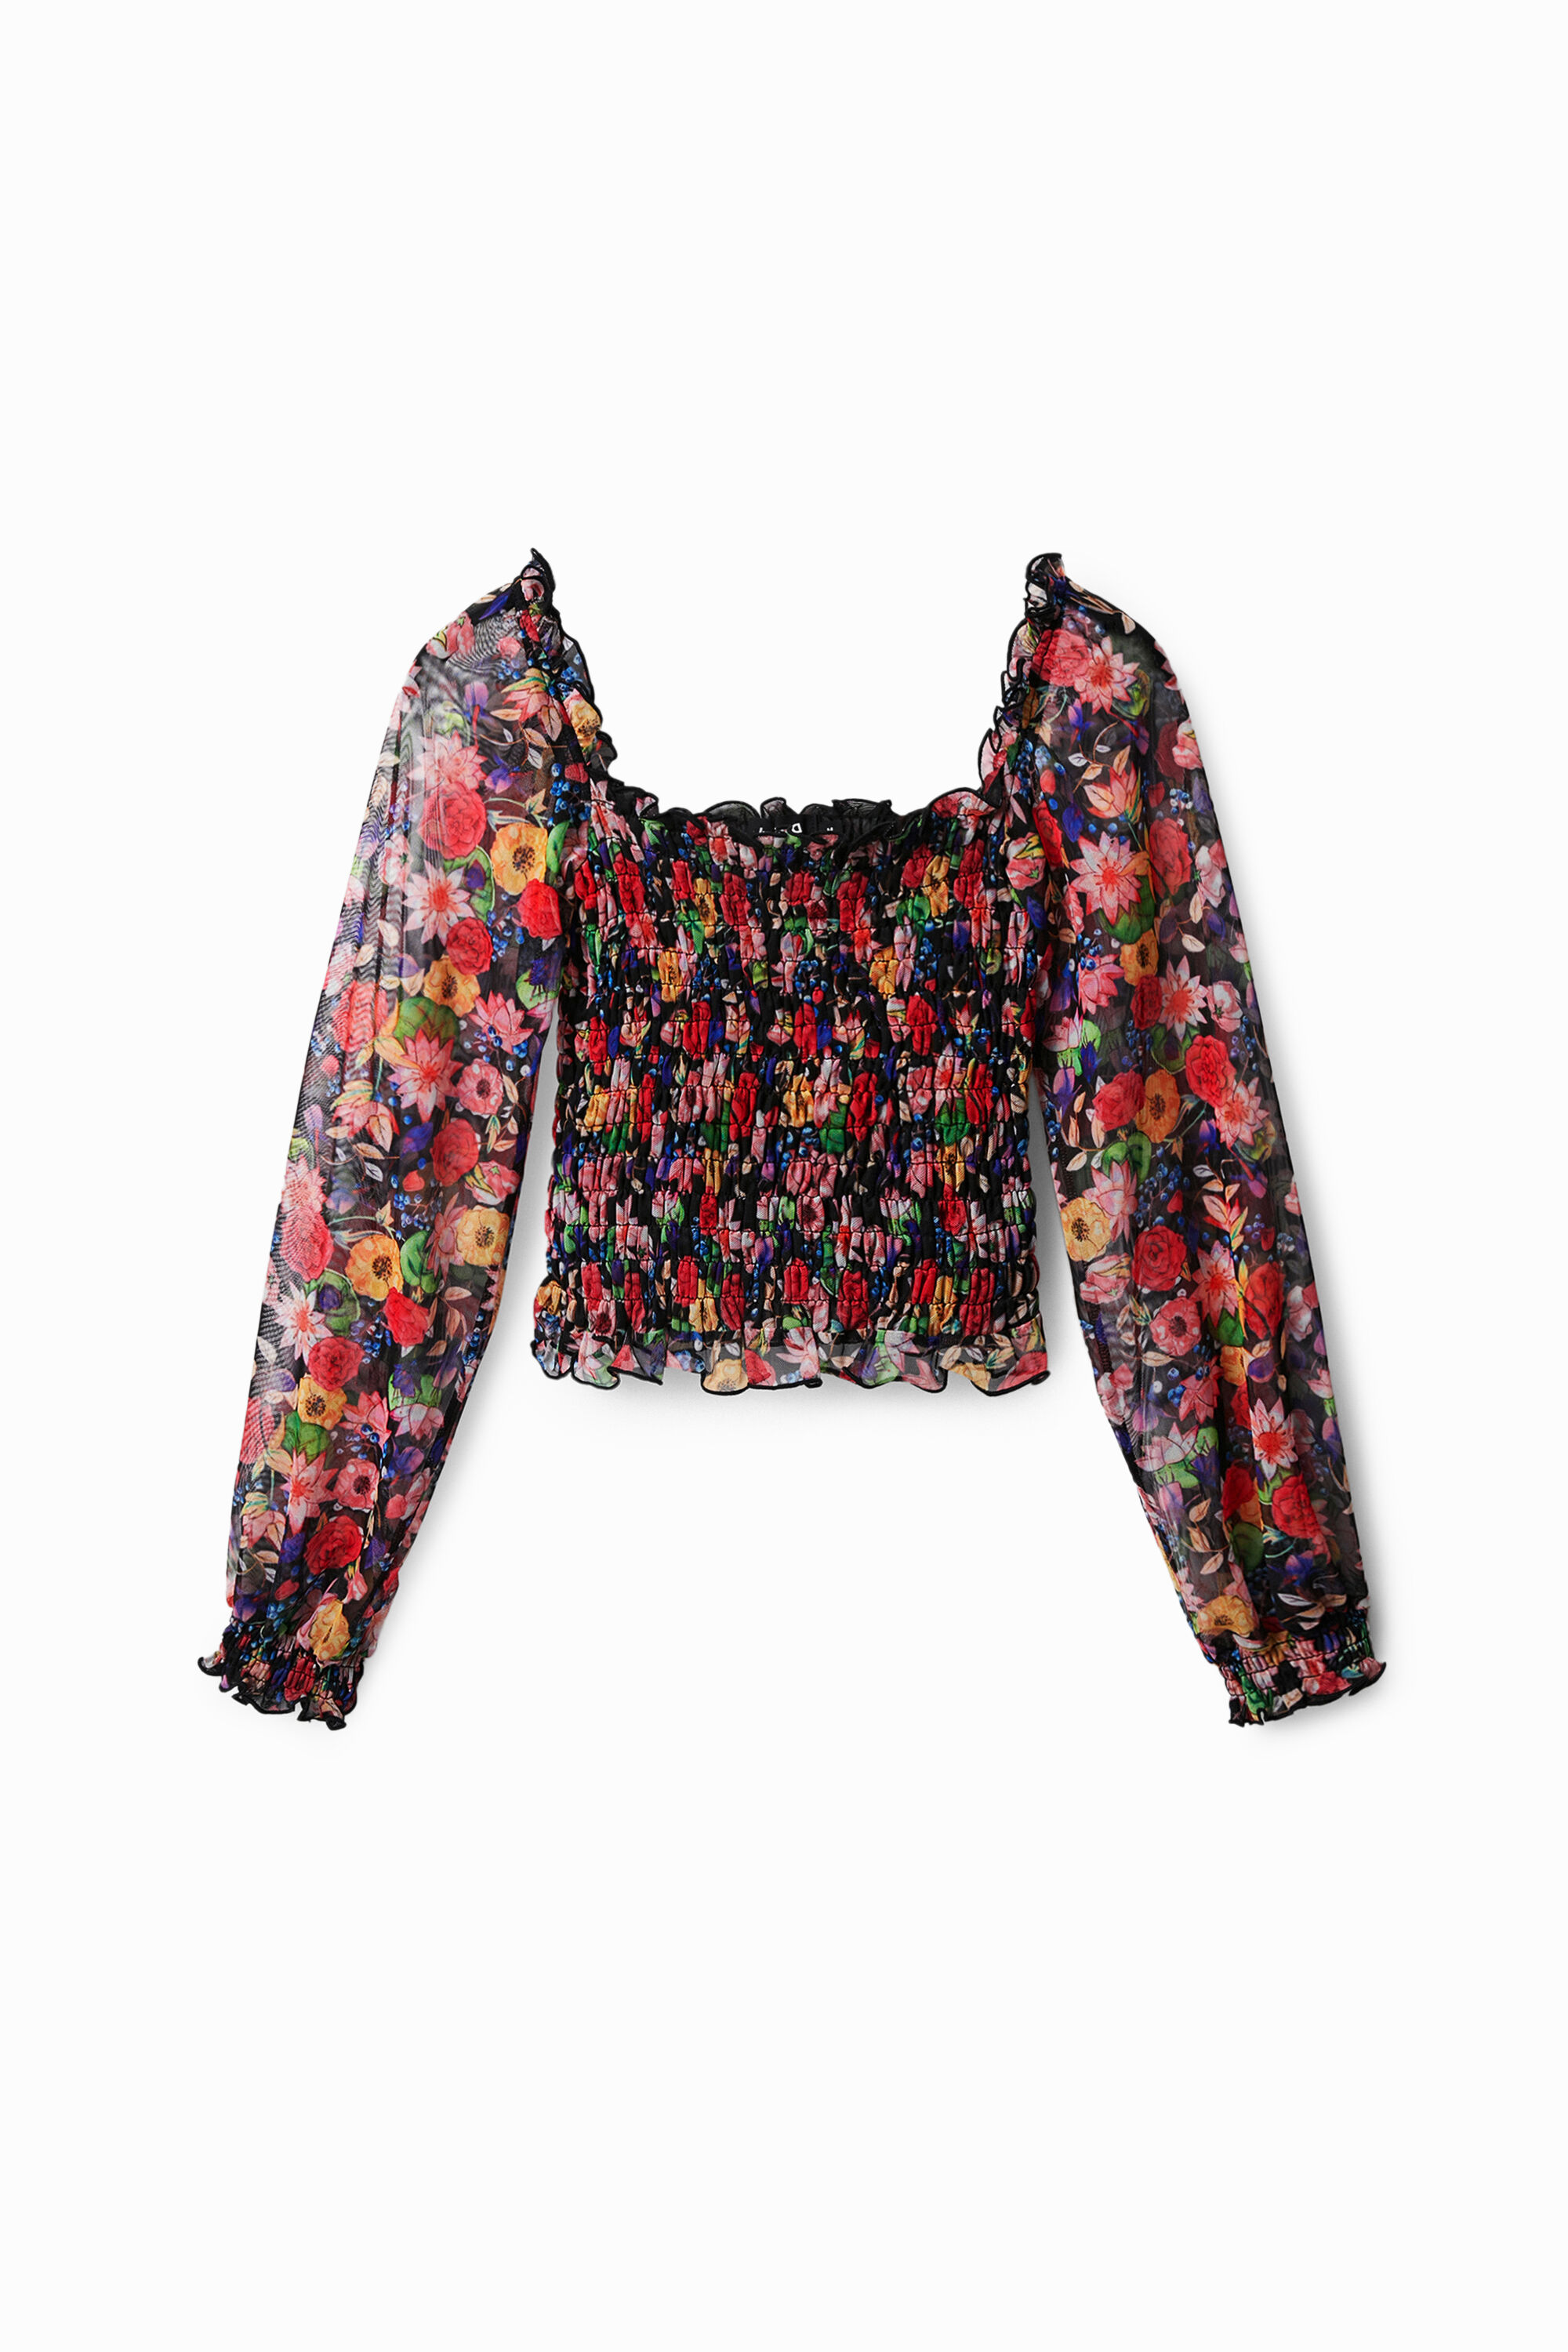 Desigual Floral Tulle T-shirt In Black